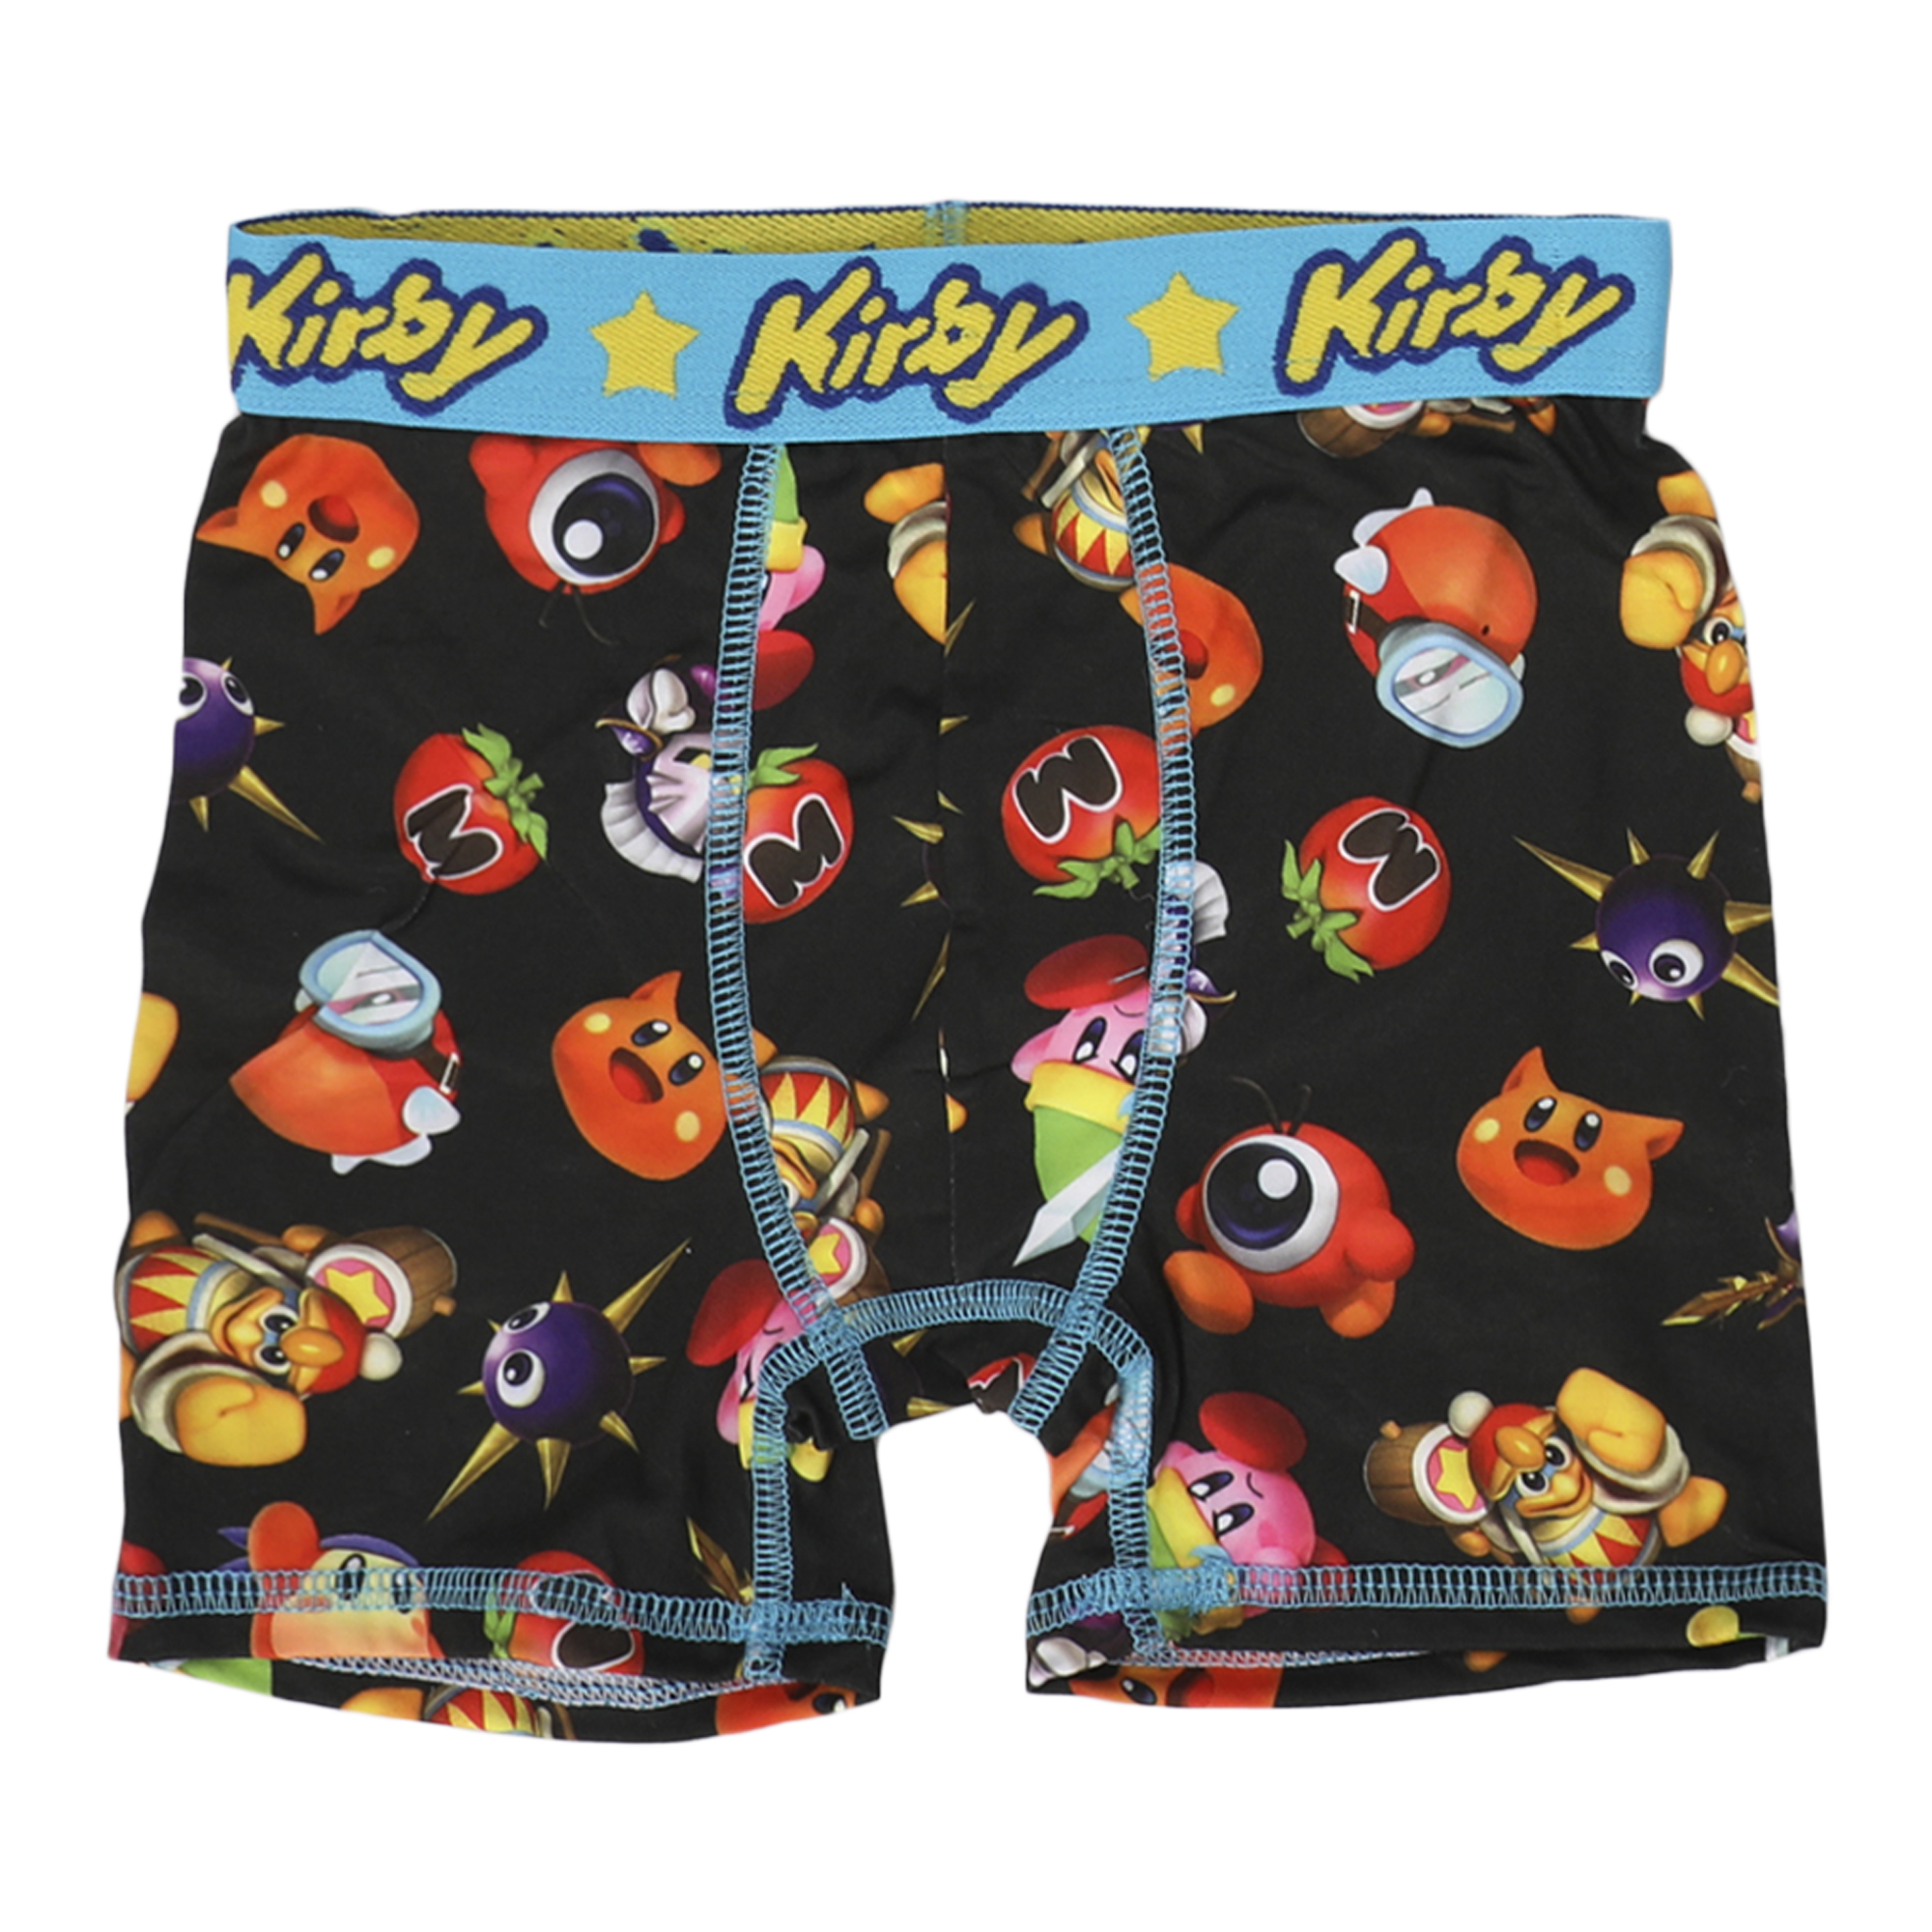 Kirby Characters & Power Ups 4-Pack Boy's Boxer Briefs-4 - image 5 of 5